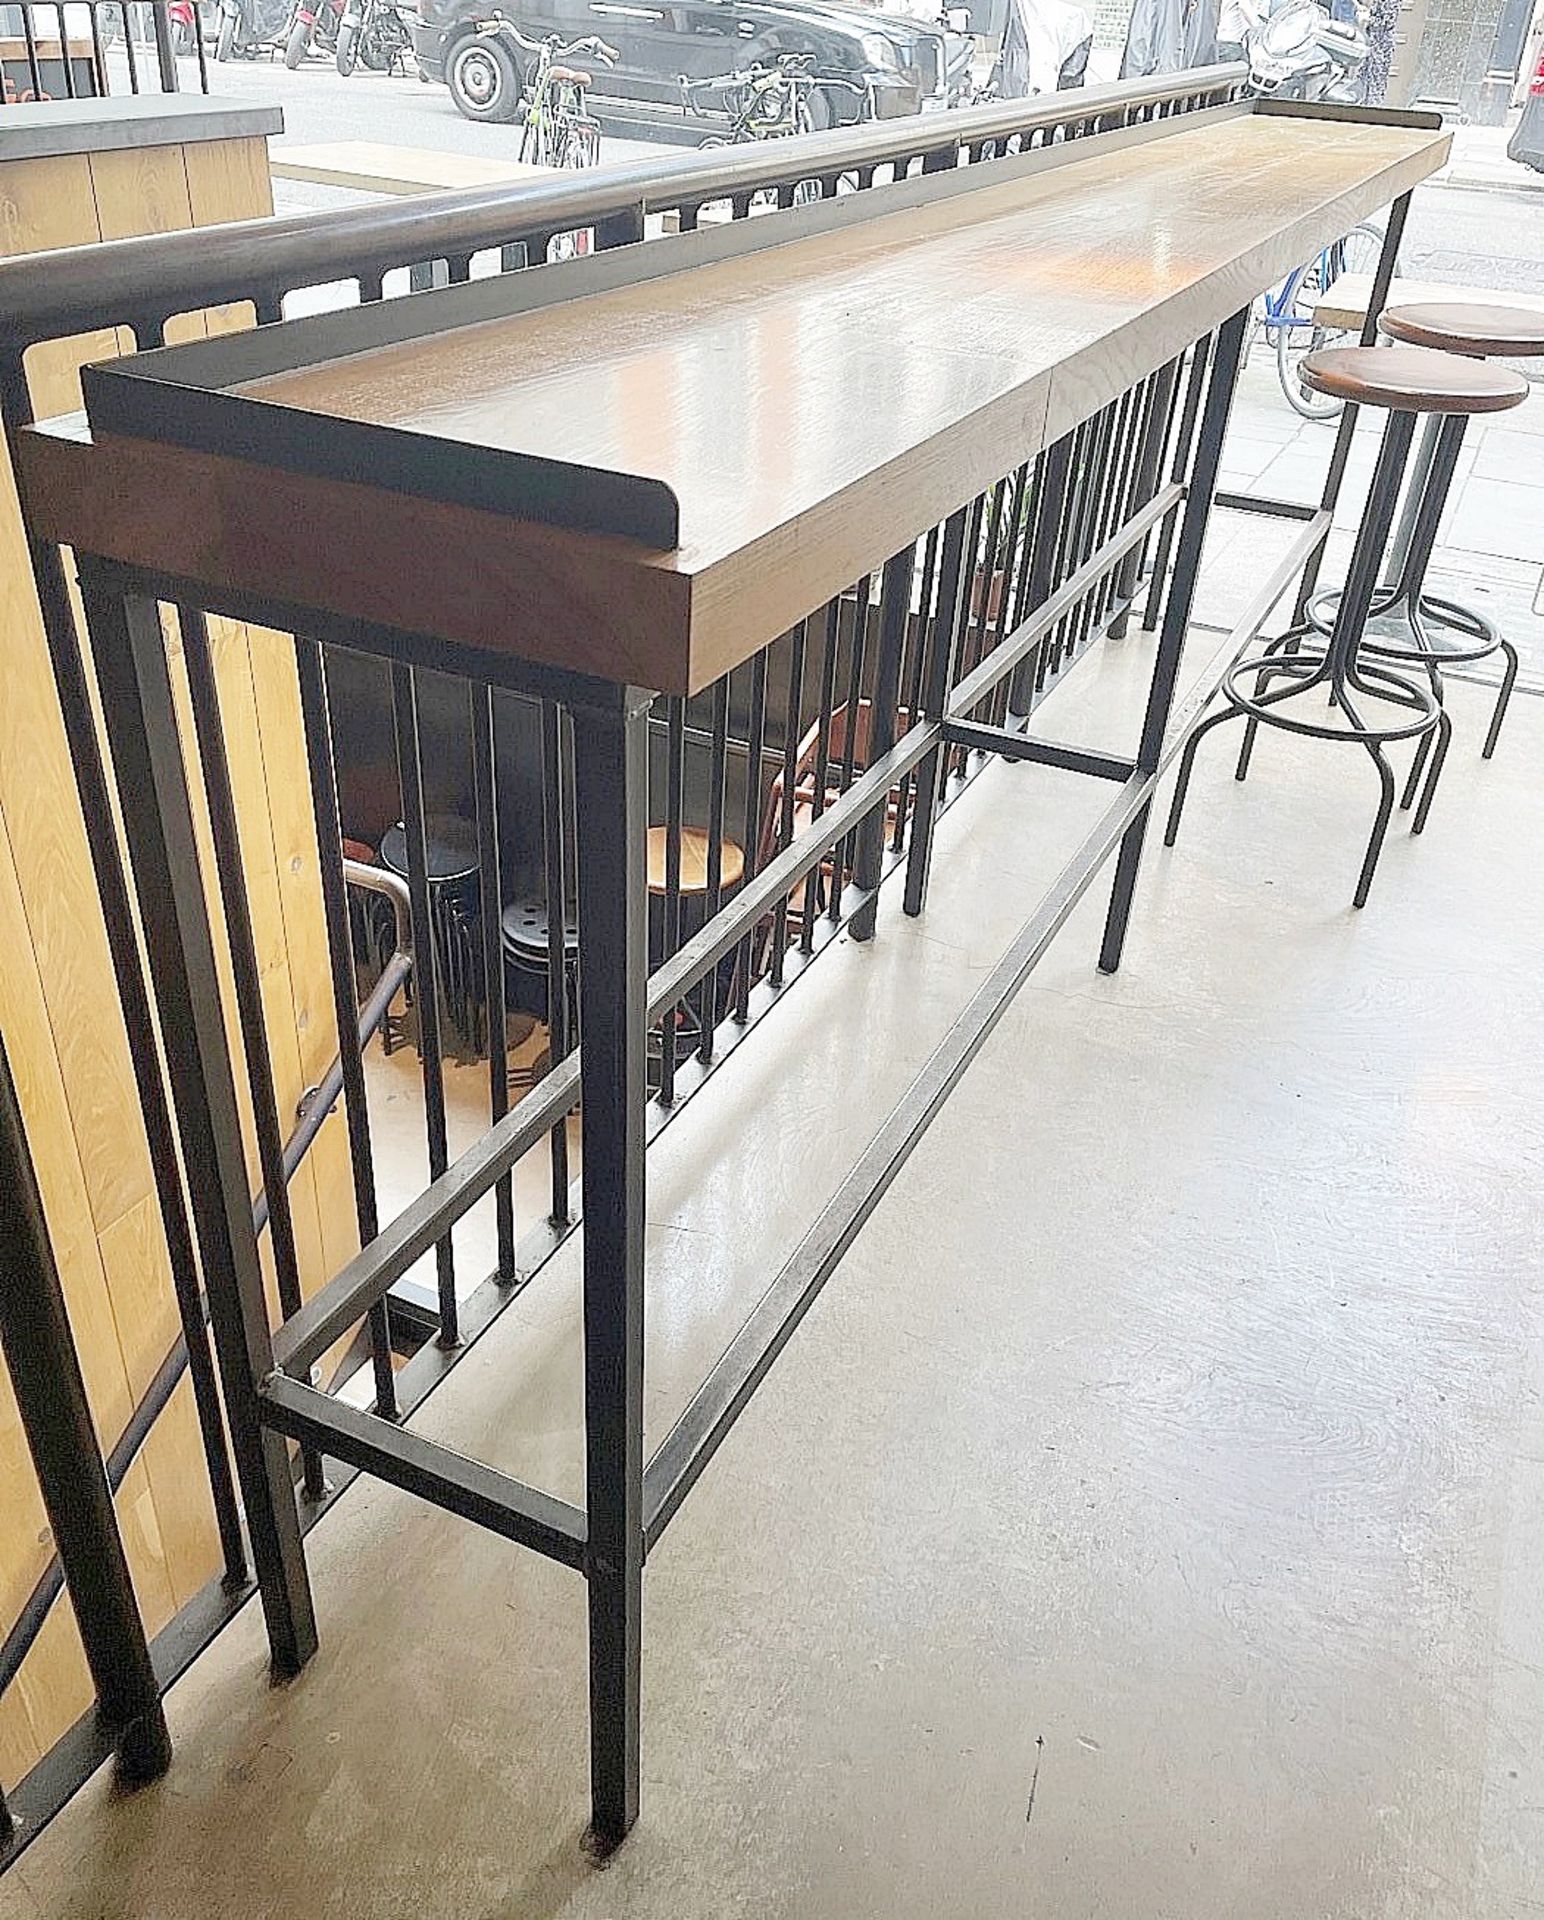 1 x 3-Metre Long Diner / Breakfast Bar Featuring A Solid Wood Top And Solid Metal Frame